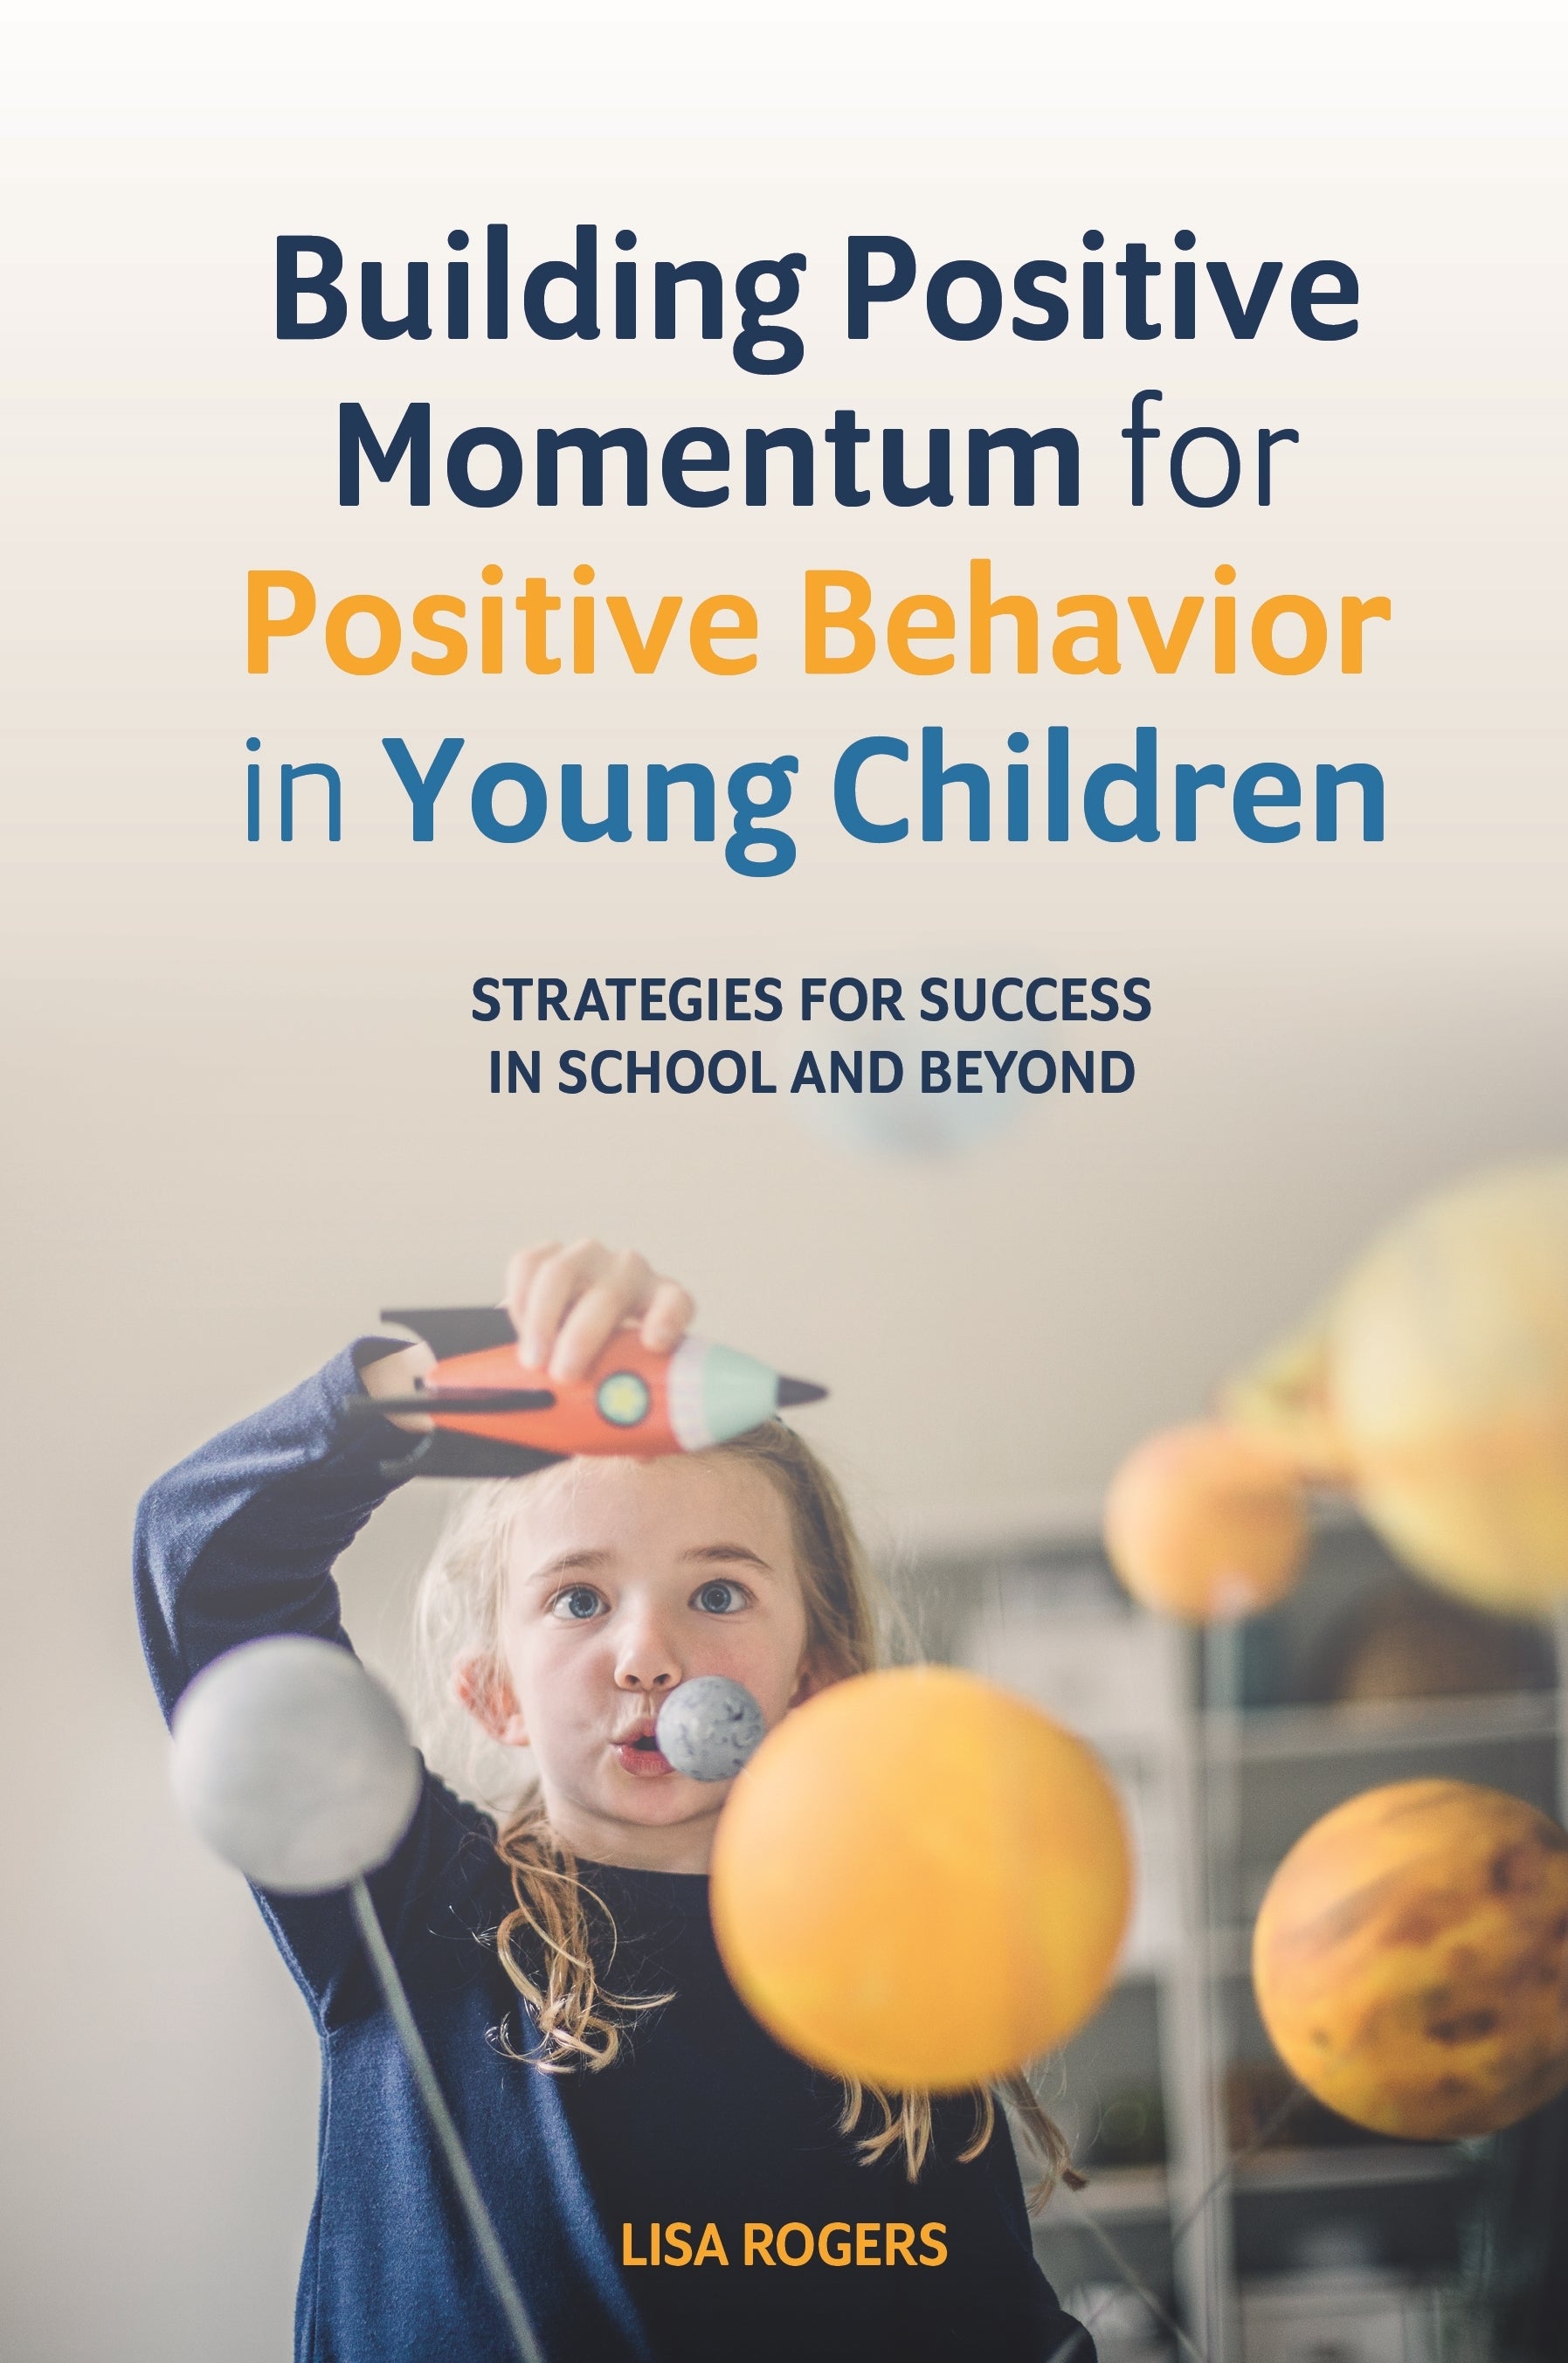 Building Positive Momentum for Positive Behavior in Young Children by Lisa Rogers